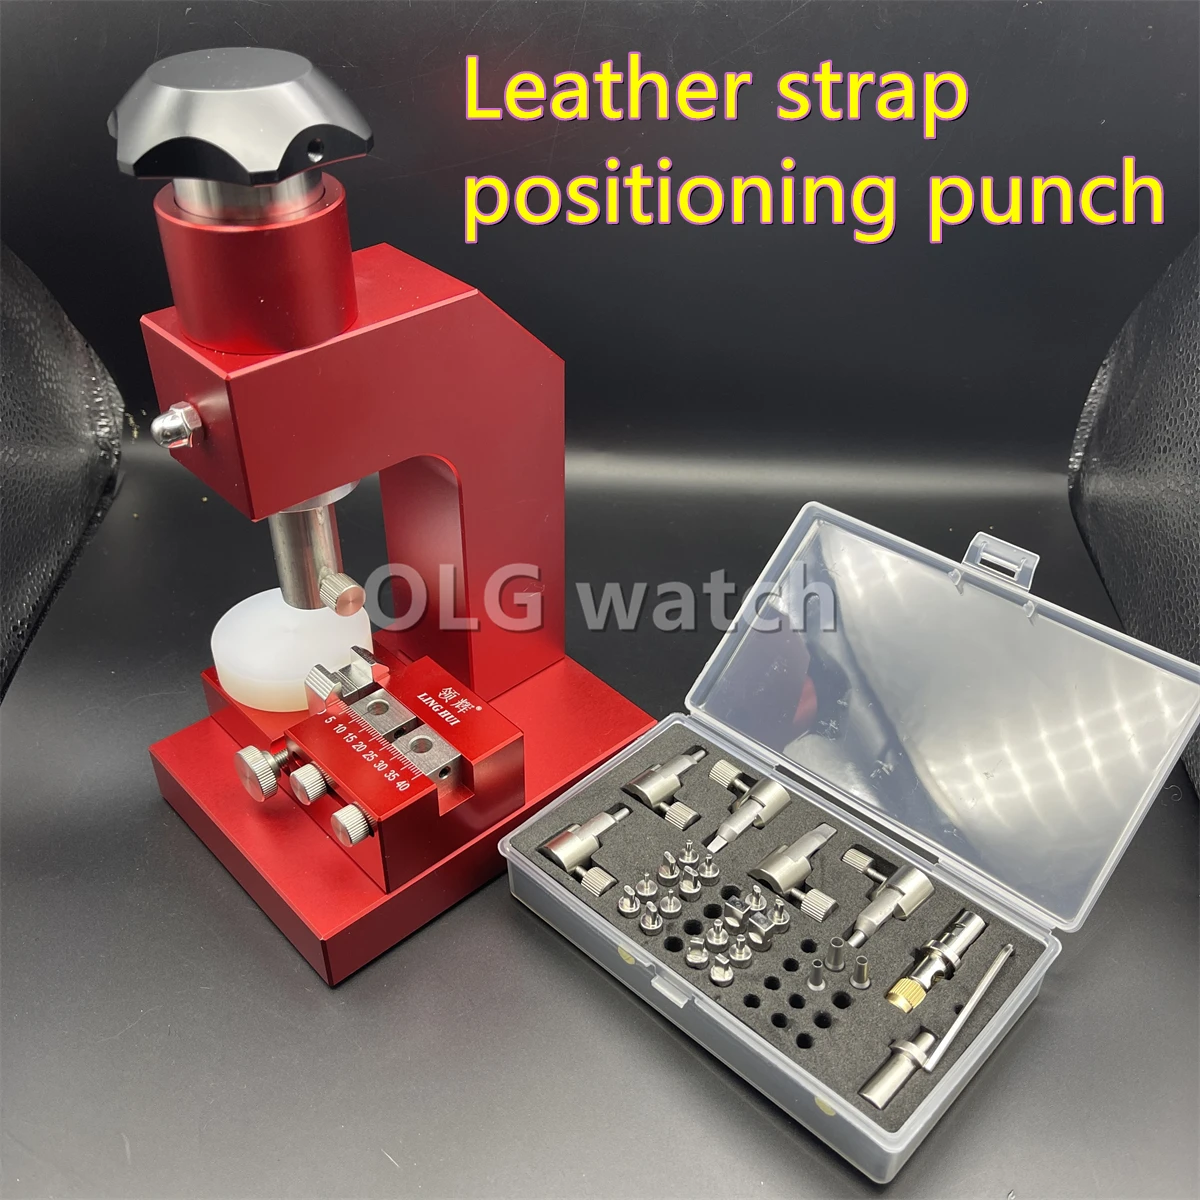 

Belts Screw Punch Punching Watch Perforated leather strap Leather Craft Tools Hole Punchers Cutter Sewing